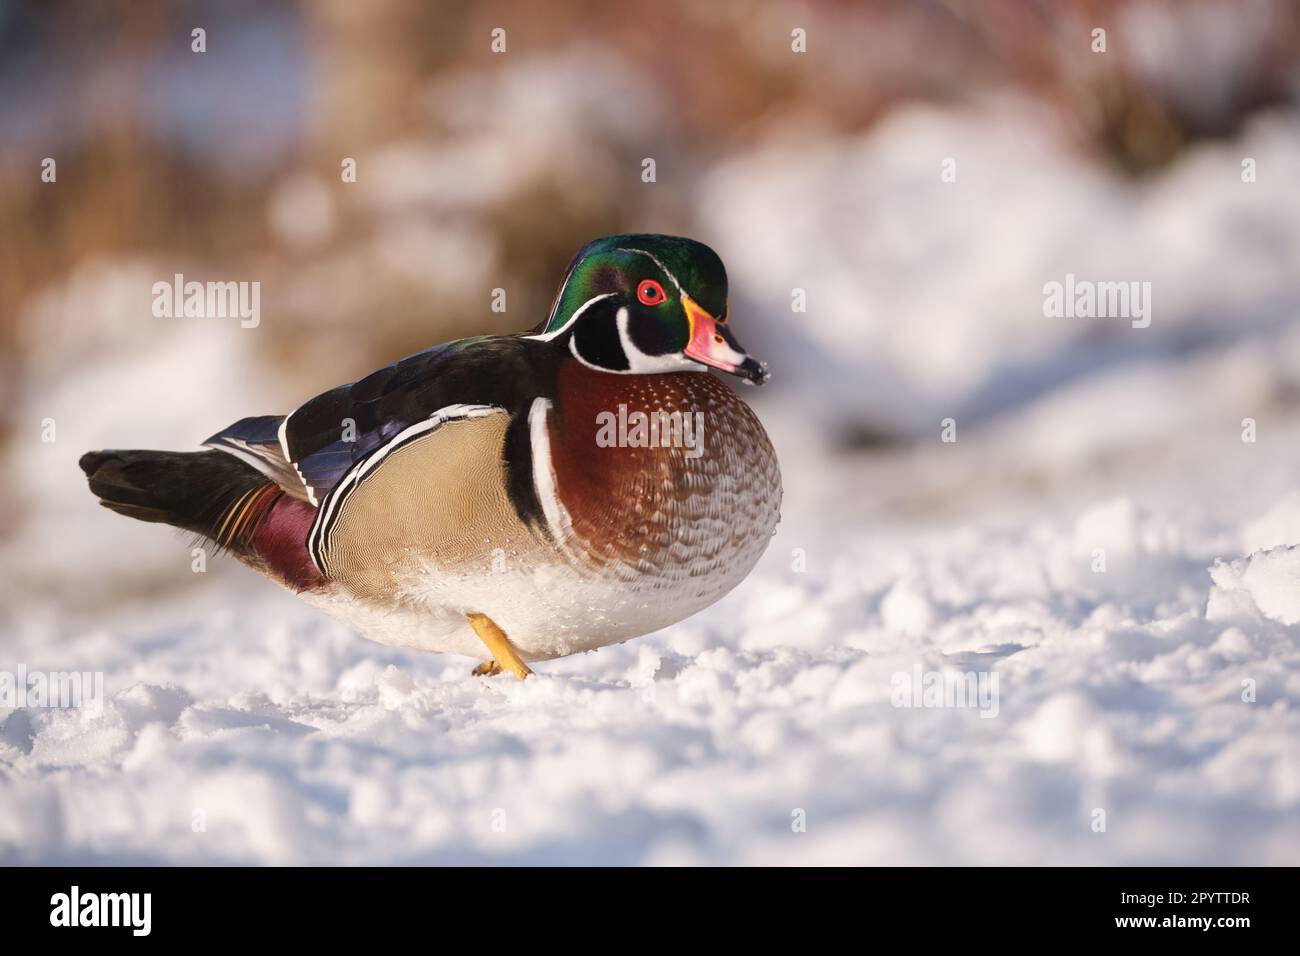 Male wood duck, Aix Sponsa, during winter in snow, walking sideways looking at camera Stock Photo